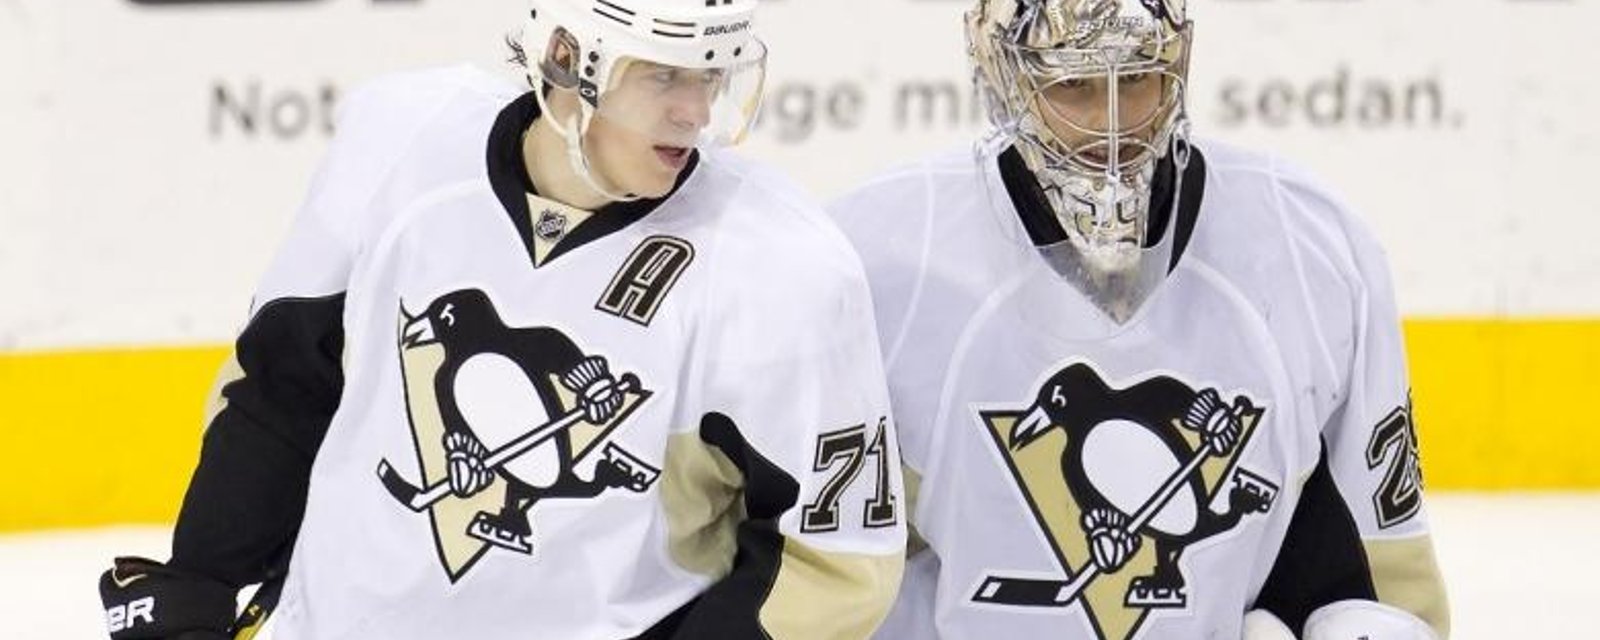 Two very promising signs for the Penguins.